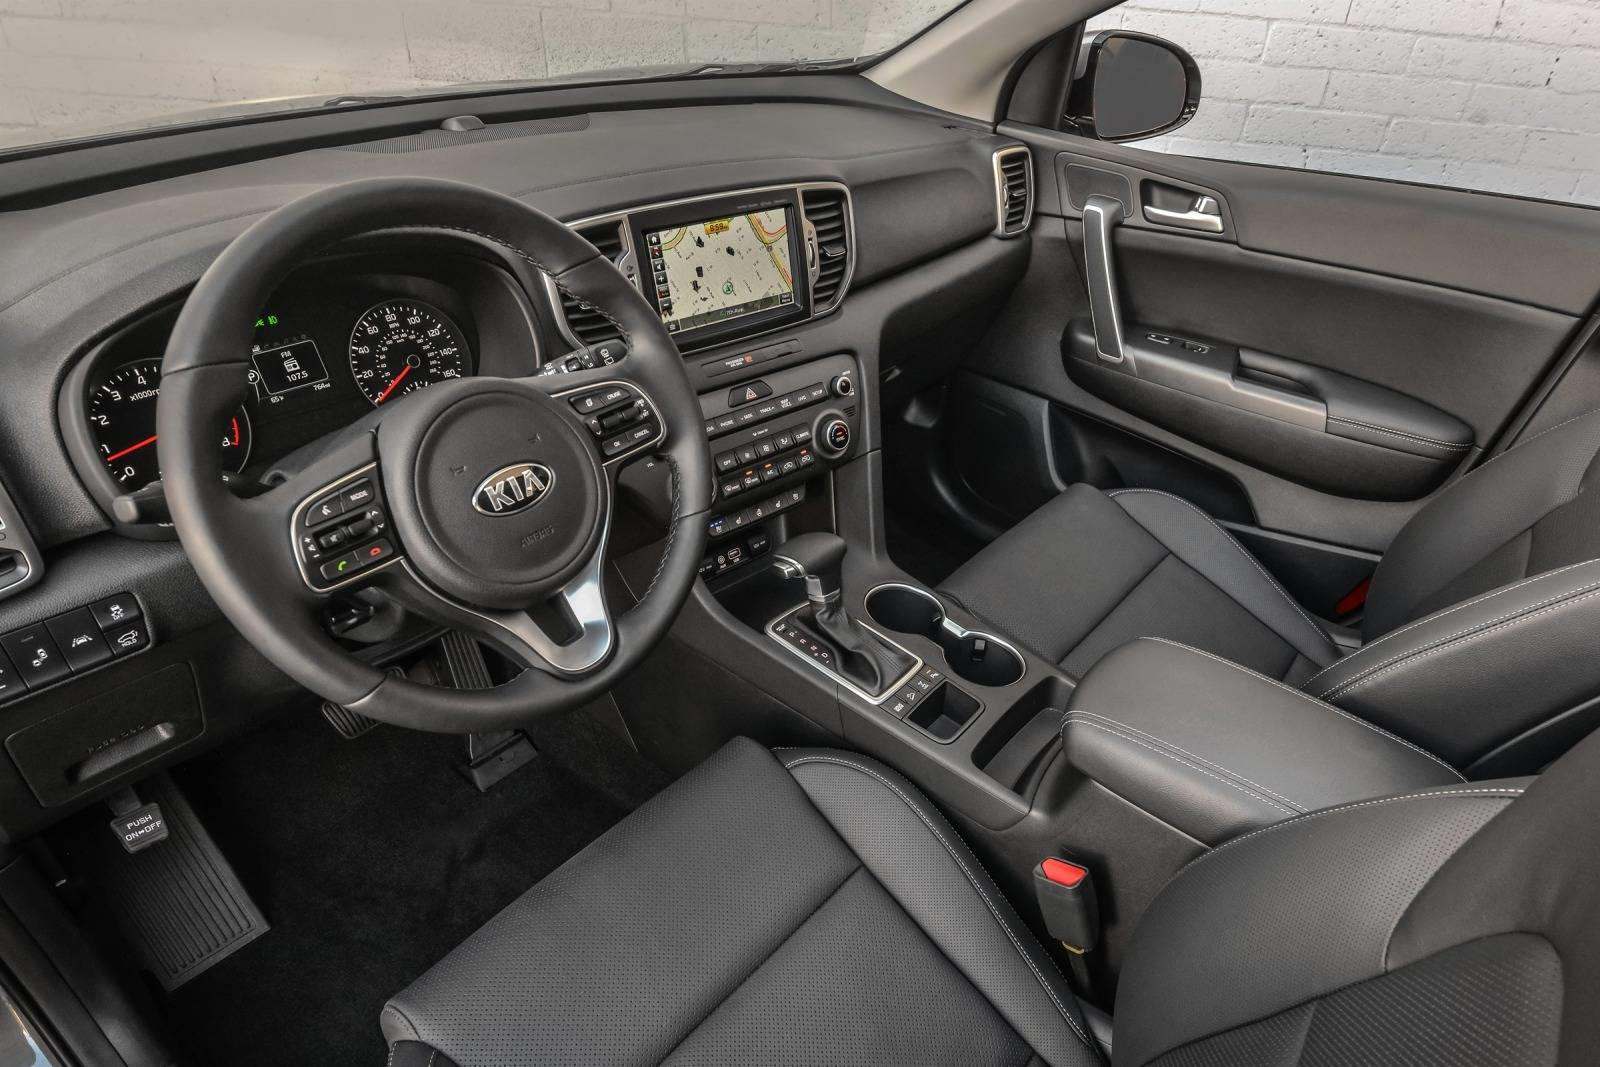 2022 Kia Sportage Interior Review  Seating Infotainment Dashboard and  Features  CARHP